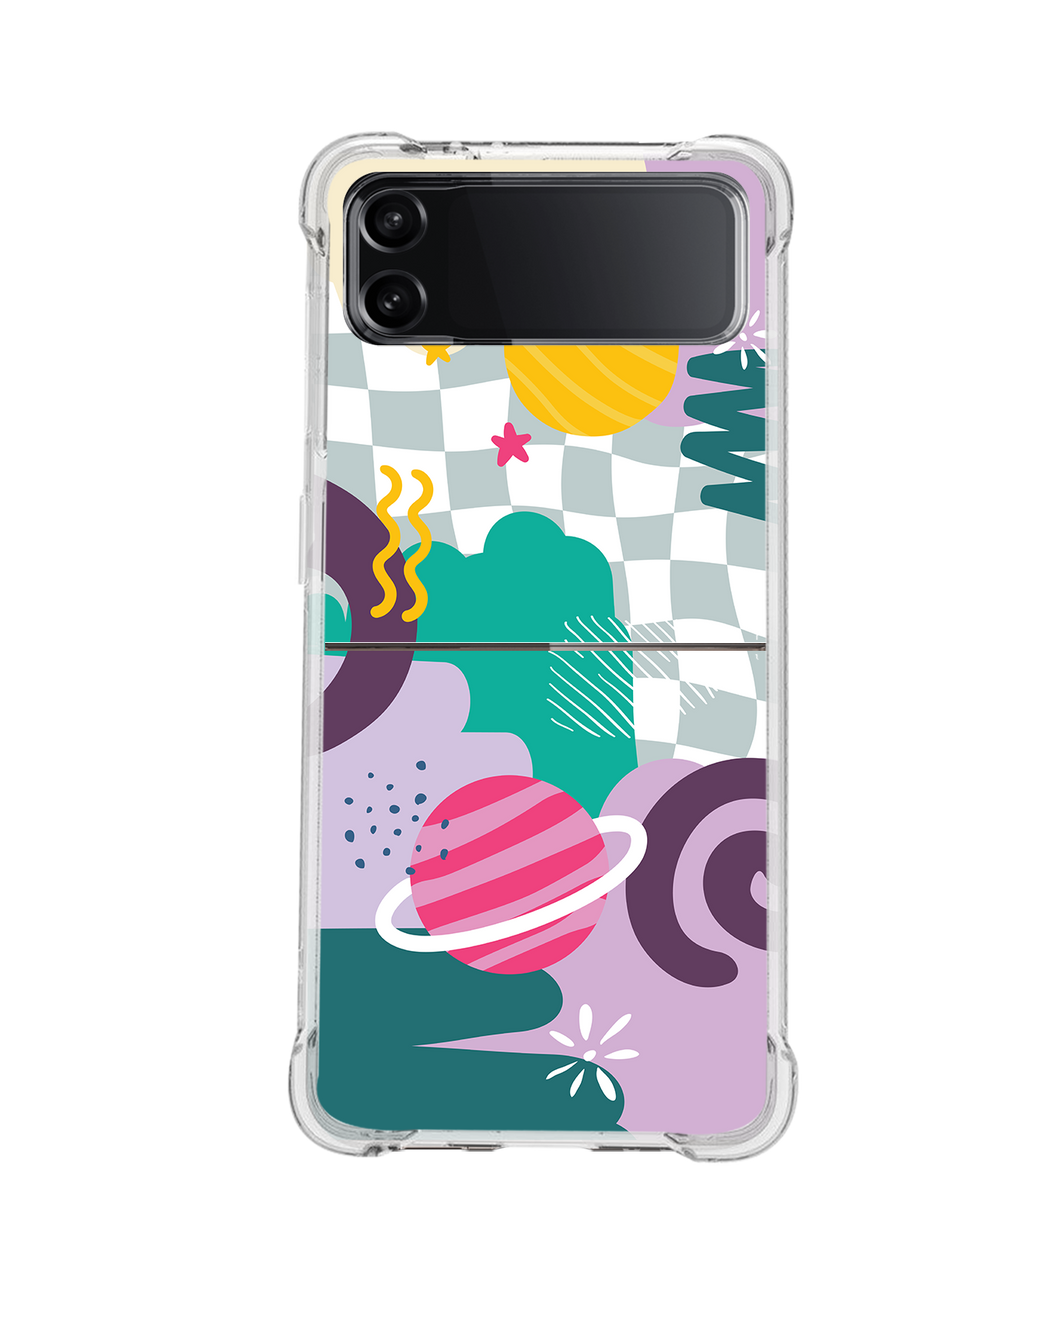 Android Flip / Fold Case - Abstract Planet 3.0